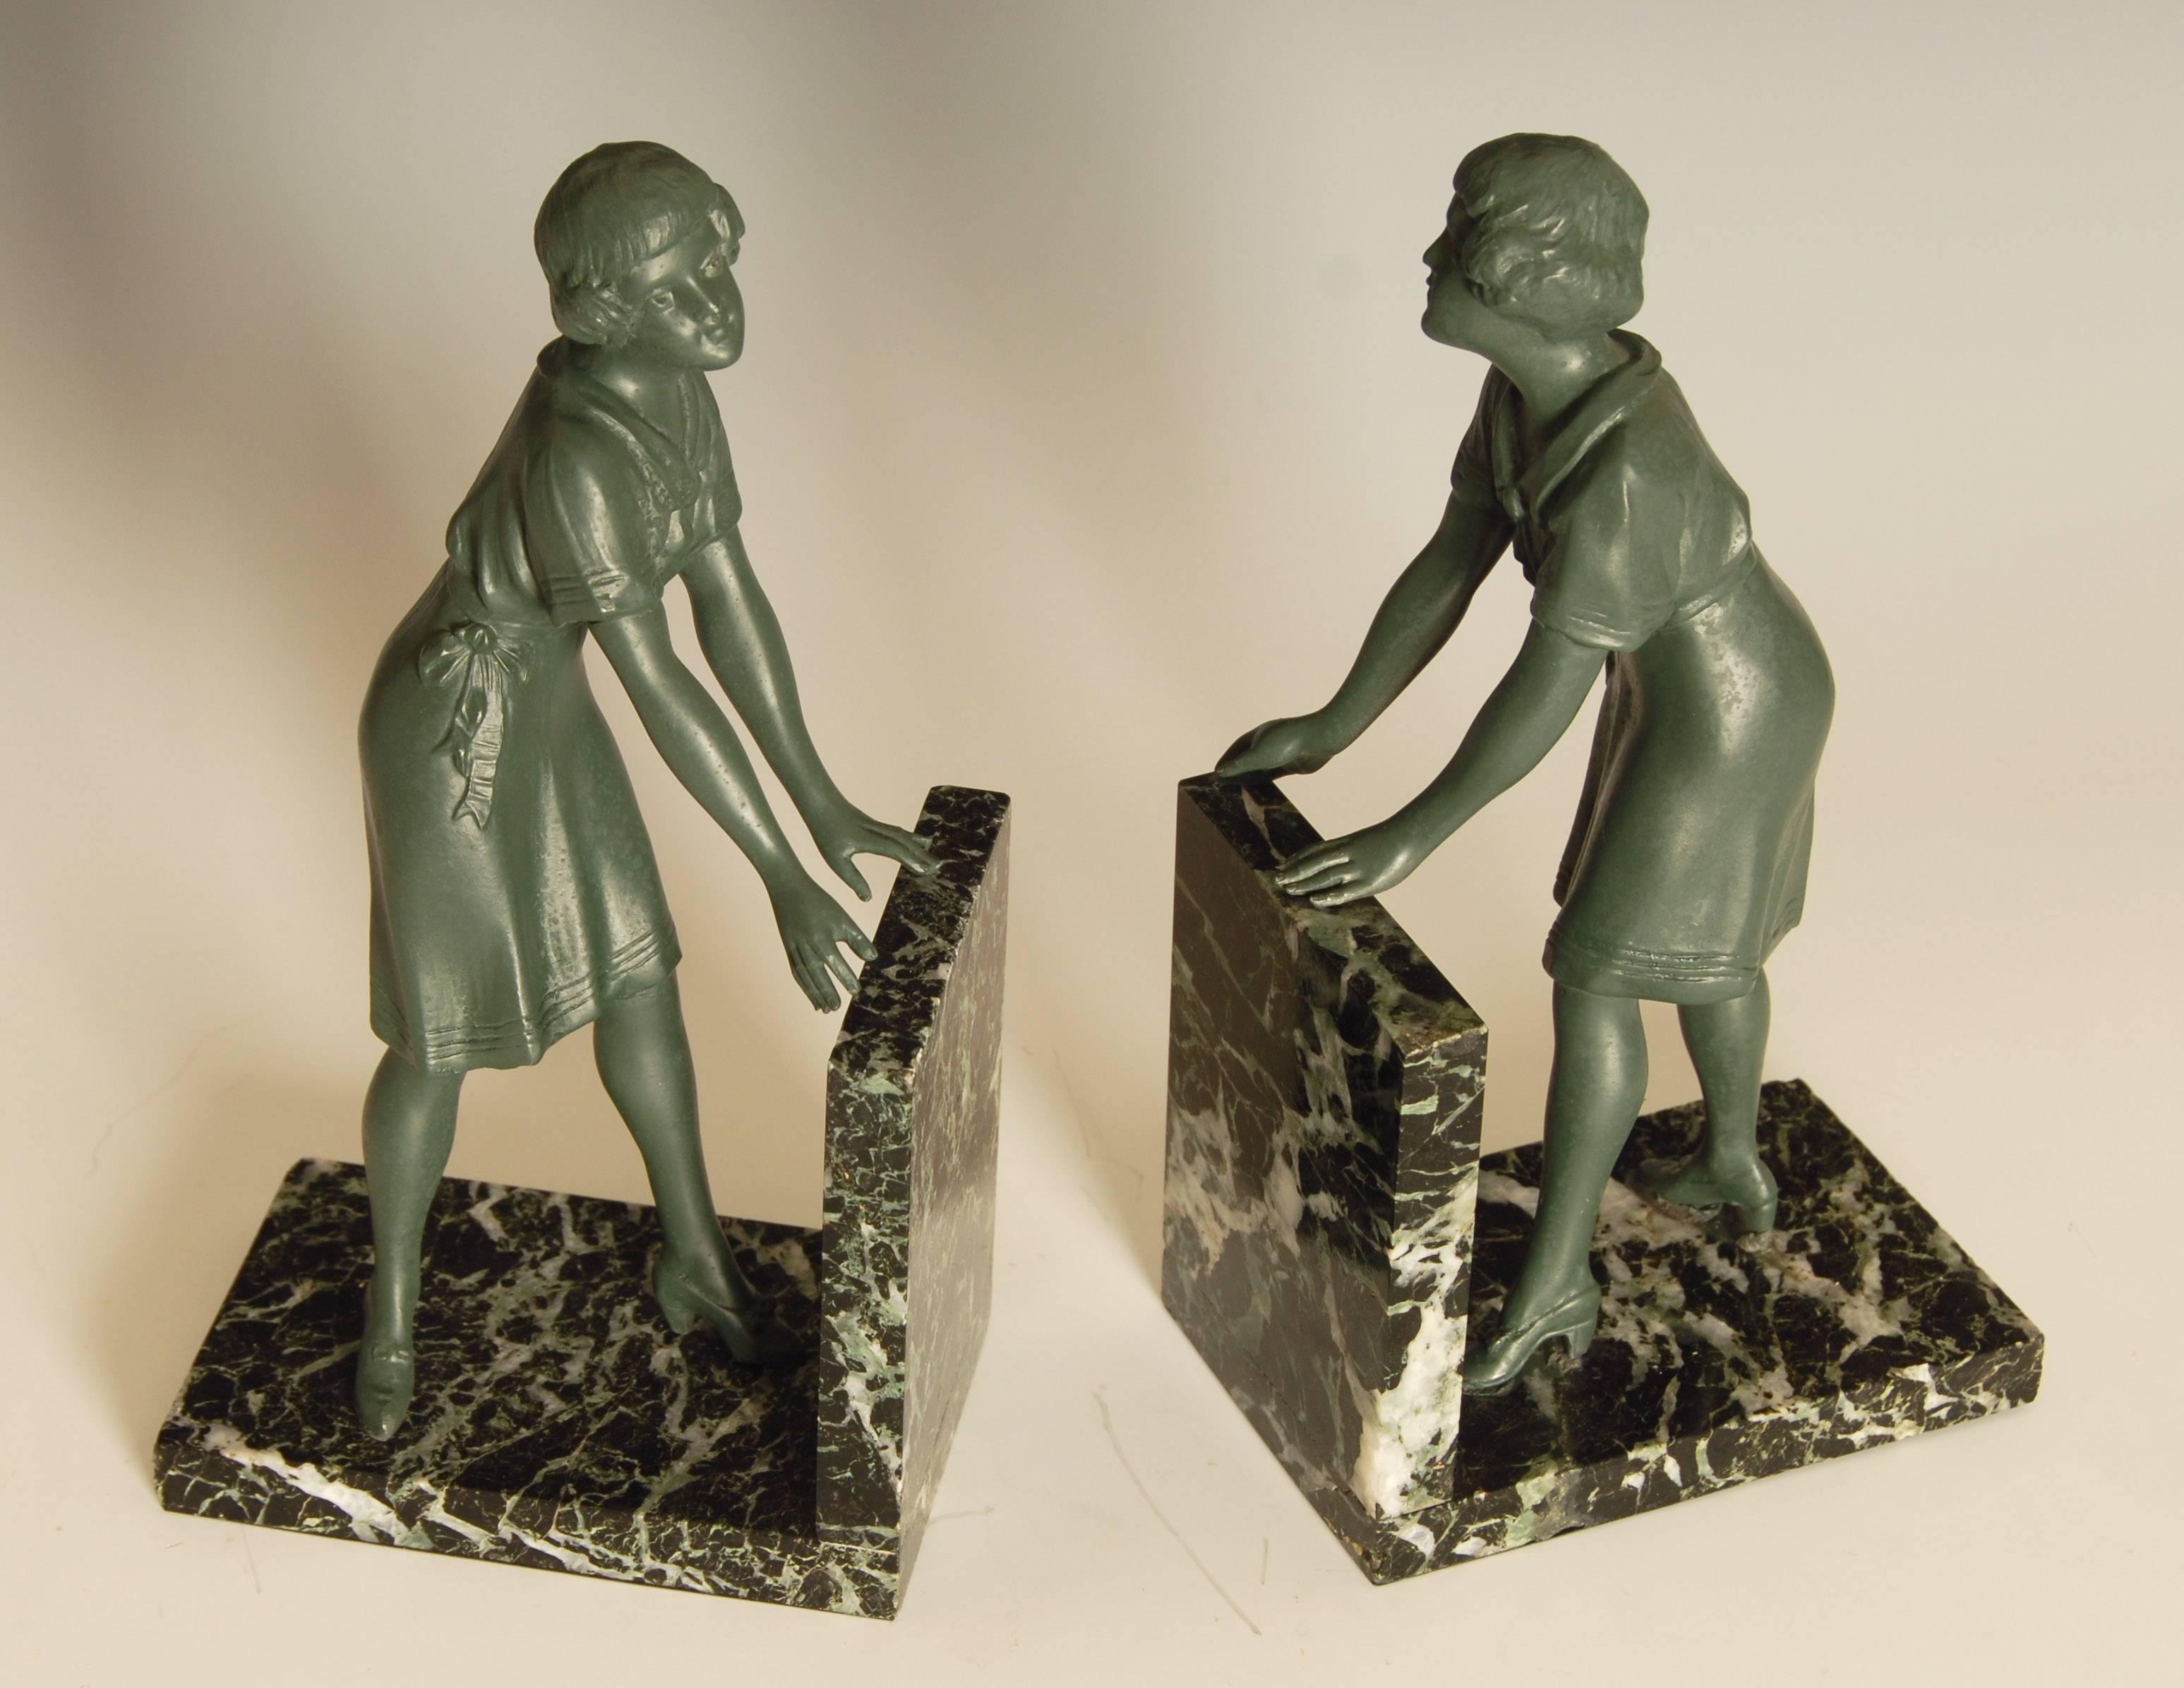 Unusual and charming pair of French Art Deco green patinated metal on green marble base bookends.
Modelled as two young ladies in conversation.

Price includes shipping to anywhere in the world.